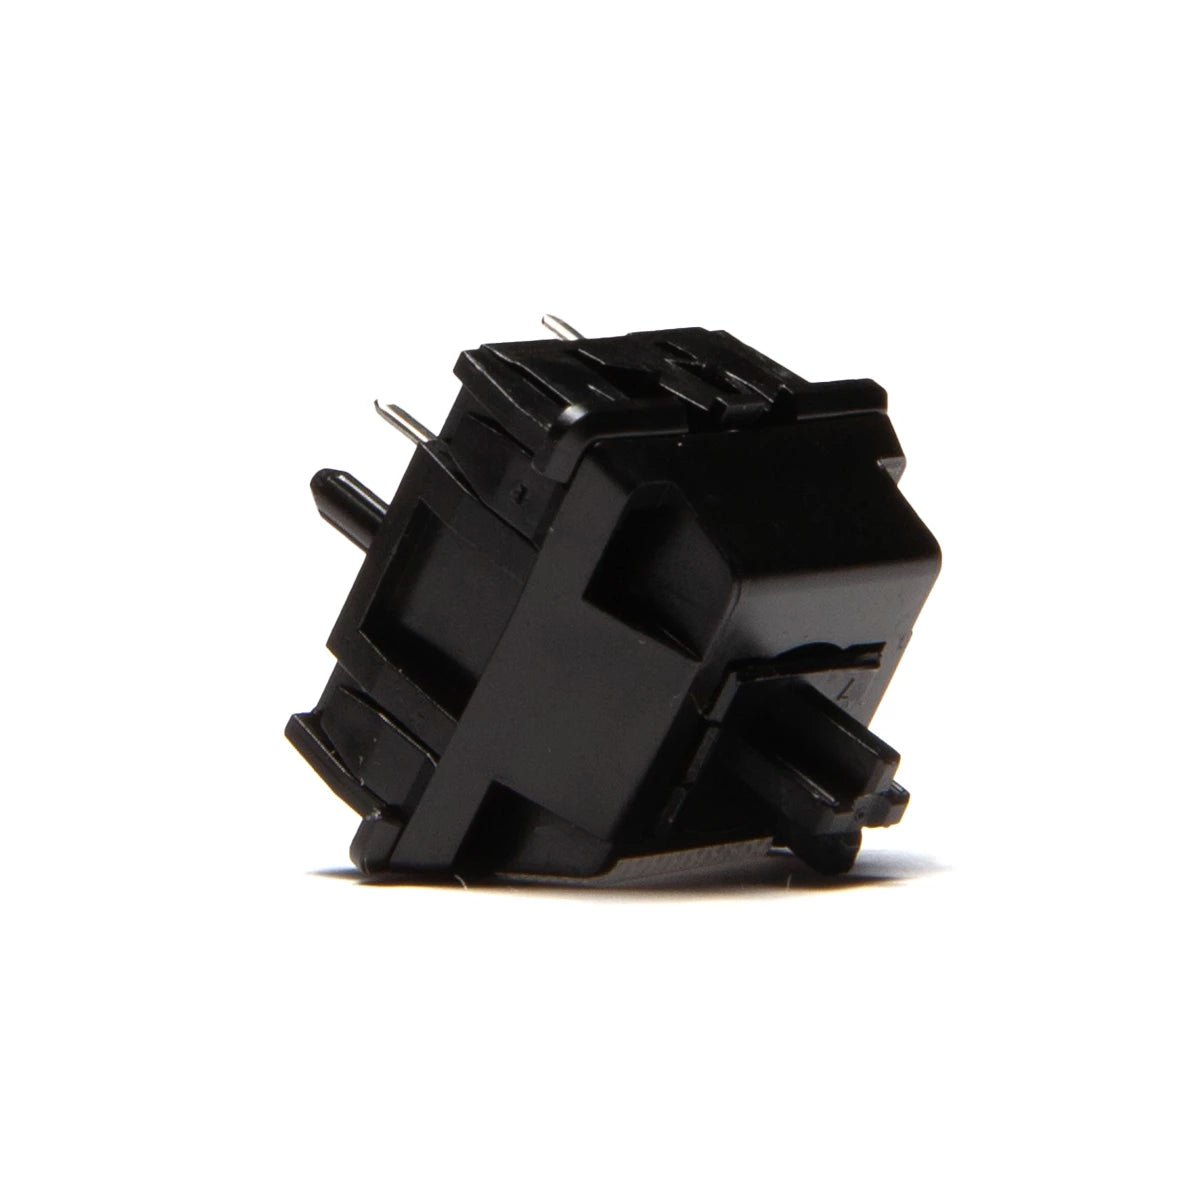 Swagkeys x Haimu MP Tactile Switches - Divinikey